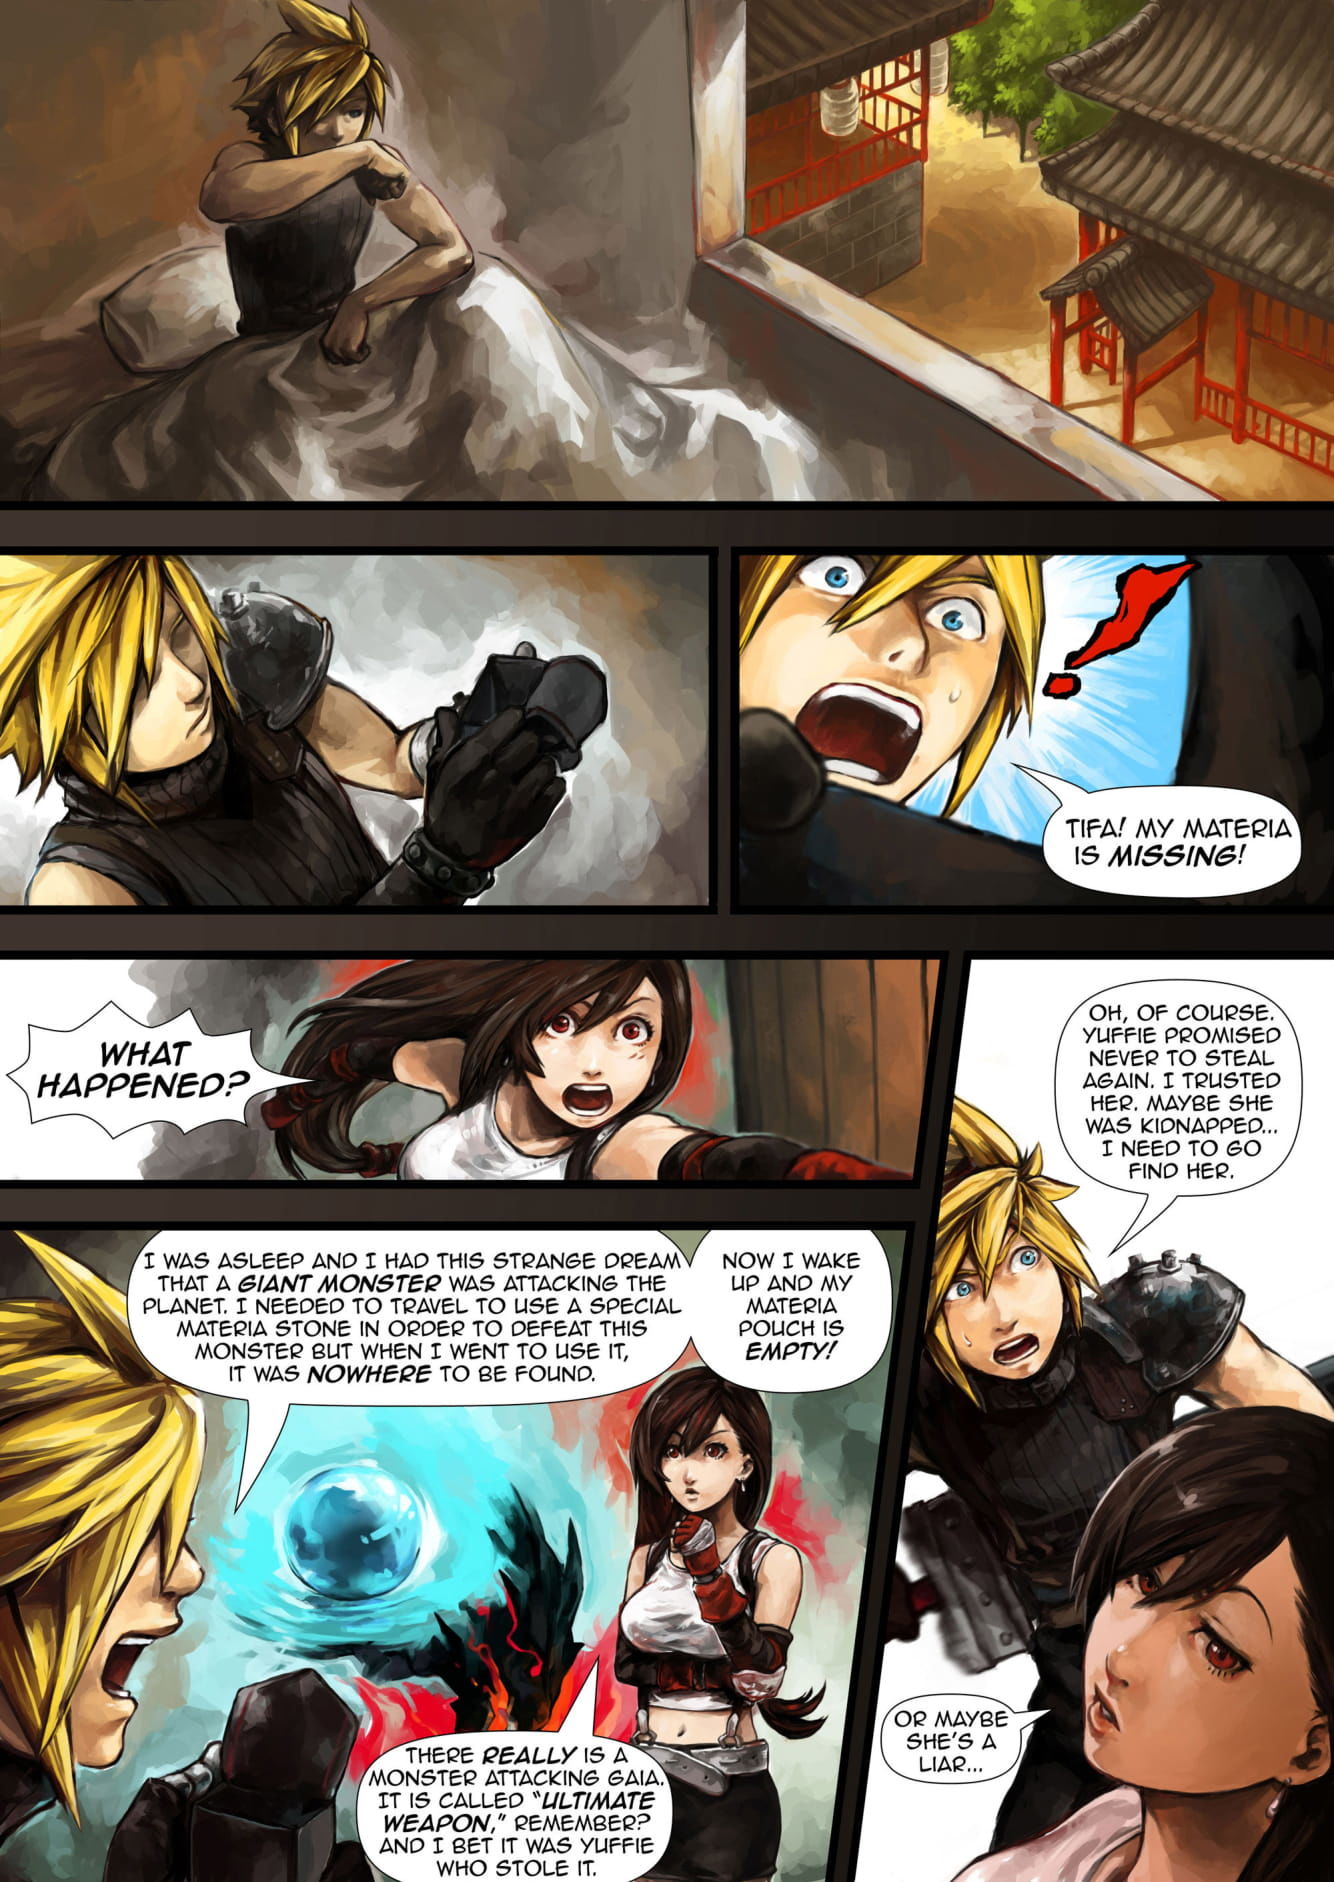 Growth Materia 1 & 2 by GiantessFan page 3